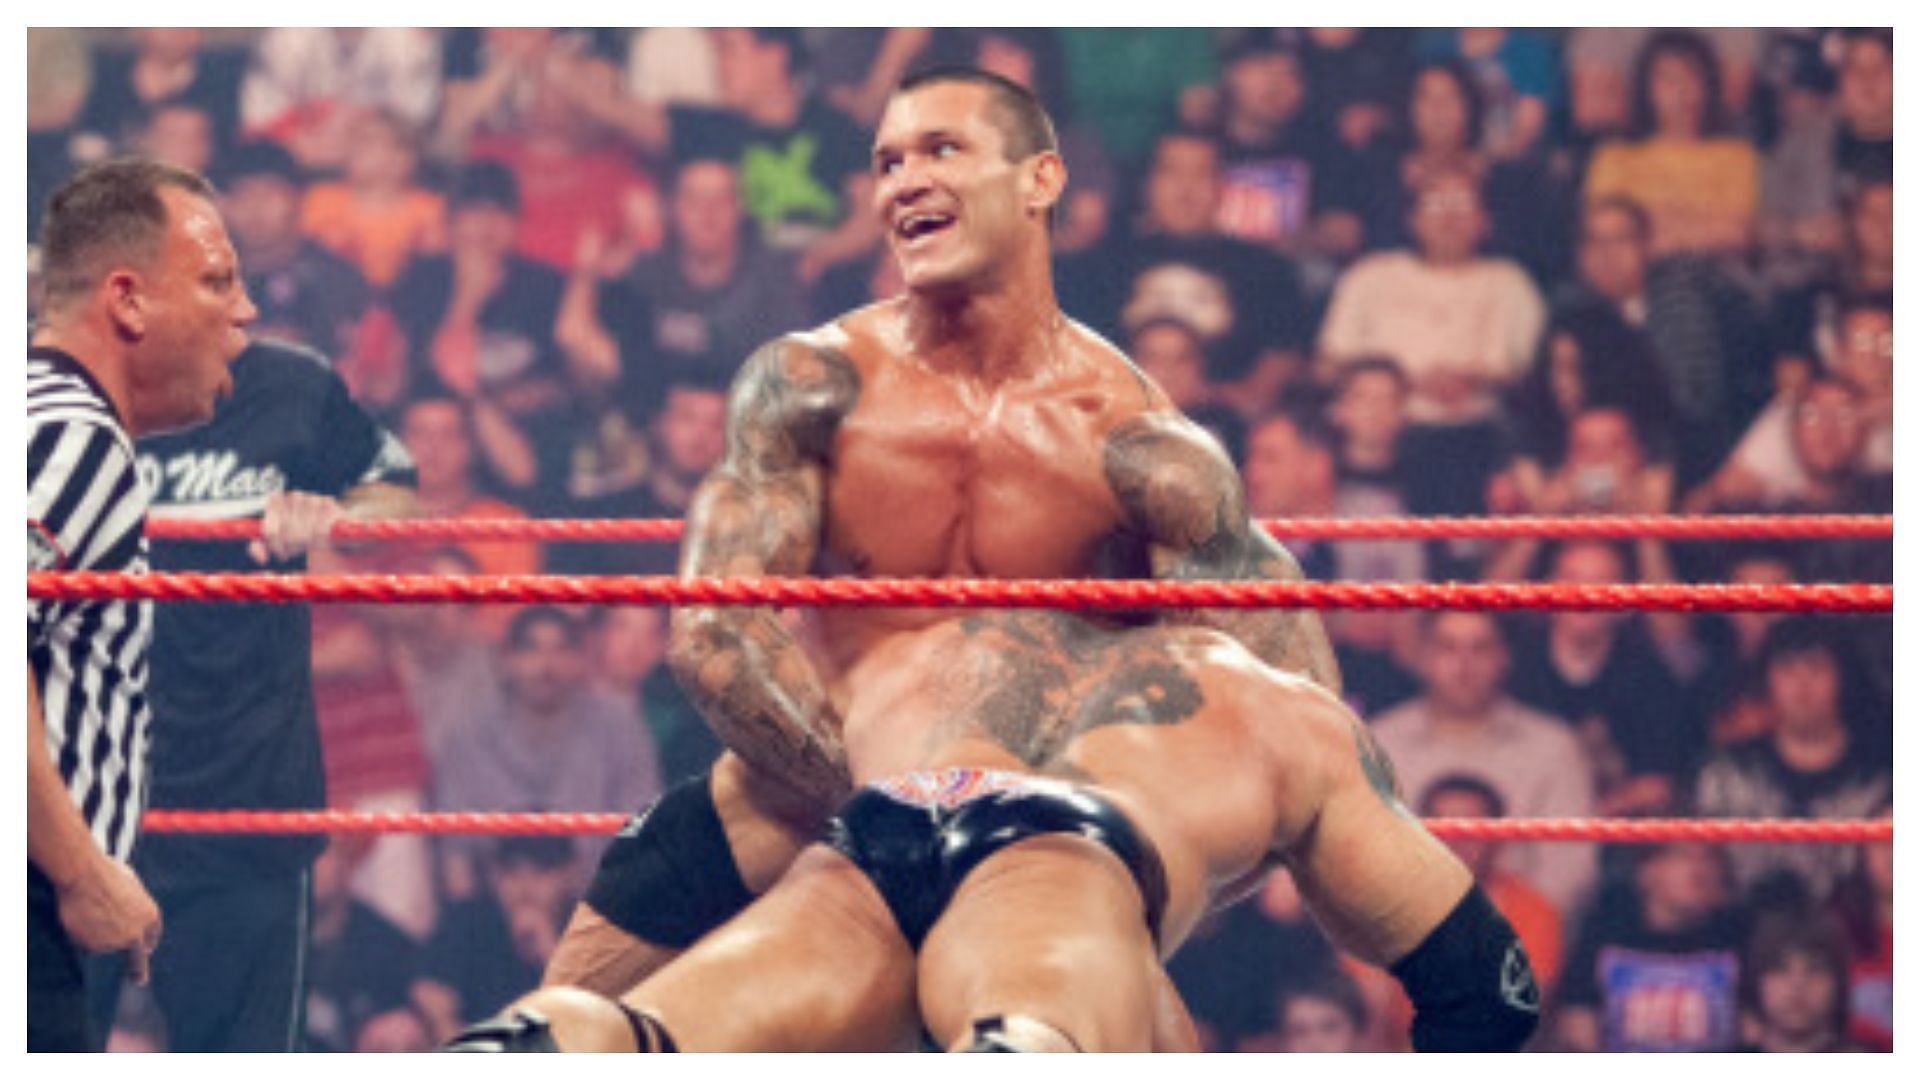 The Viper executes a draping DDT on Batista